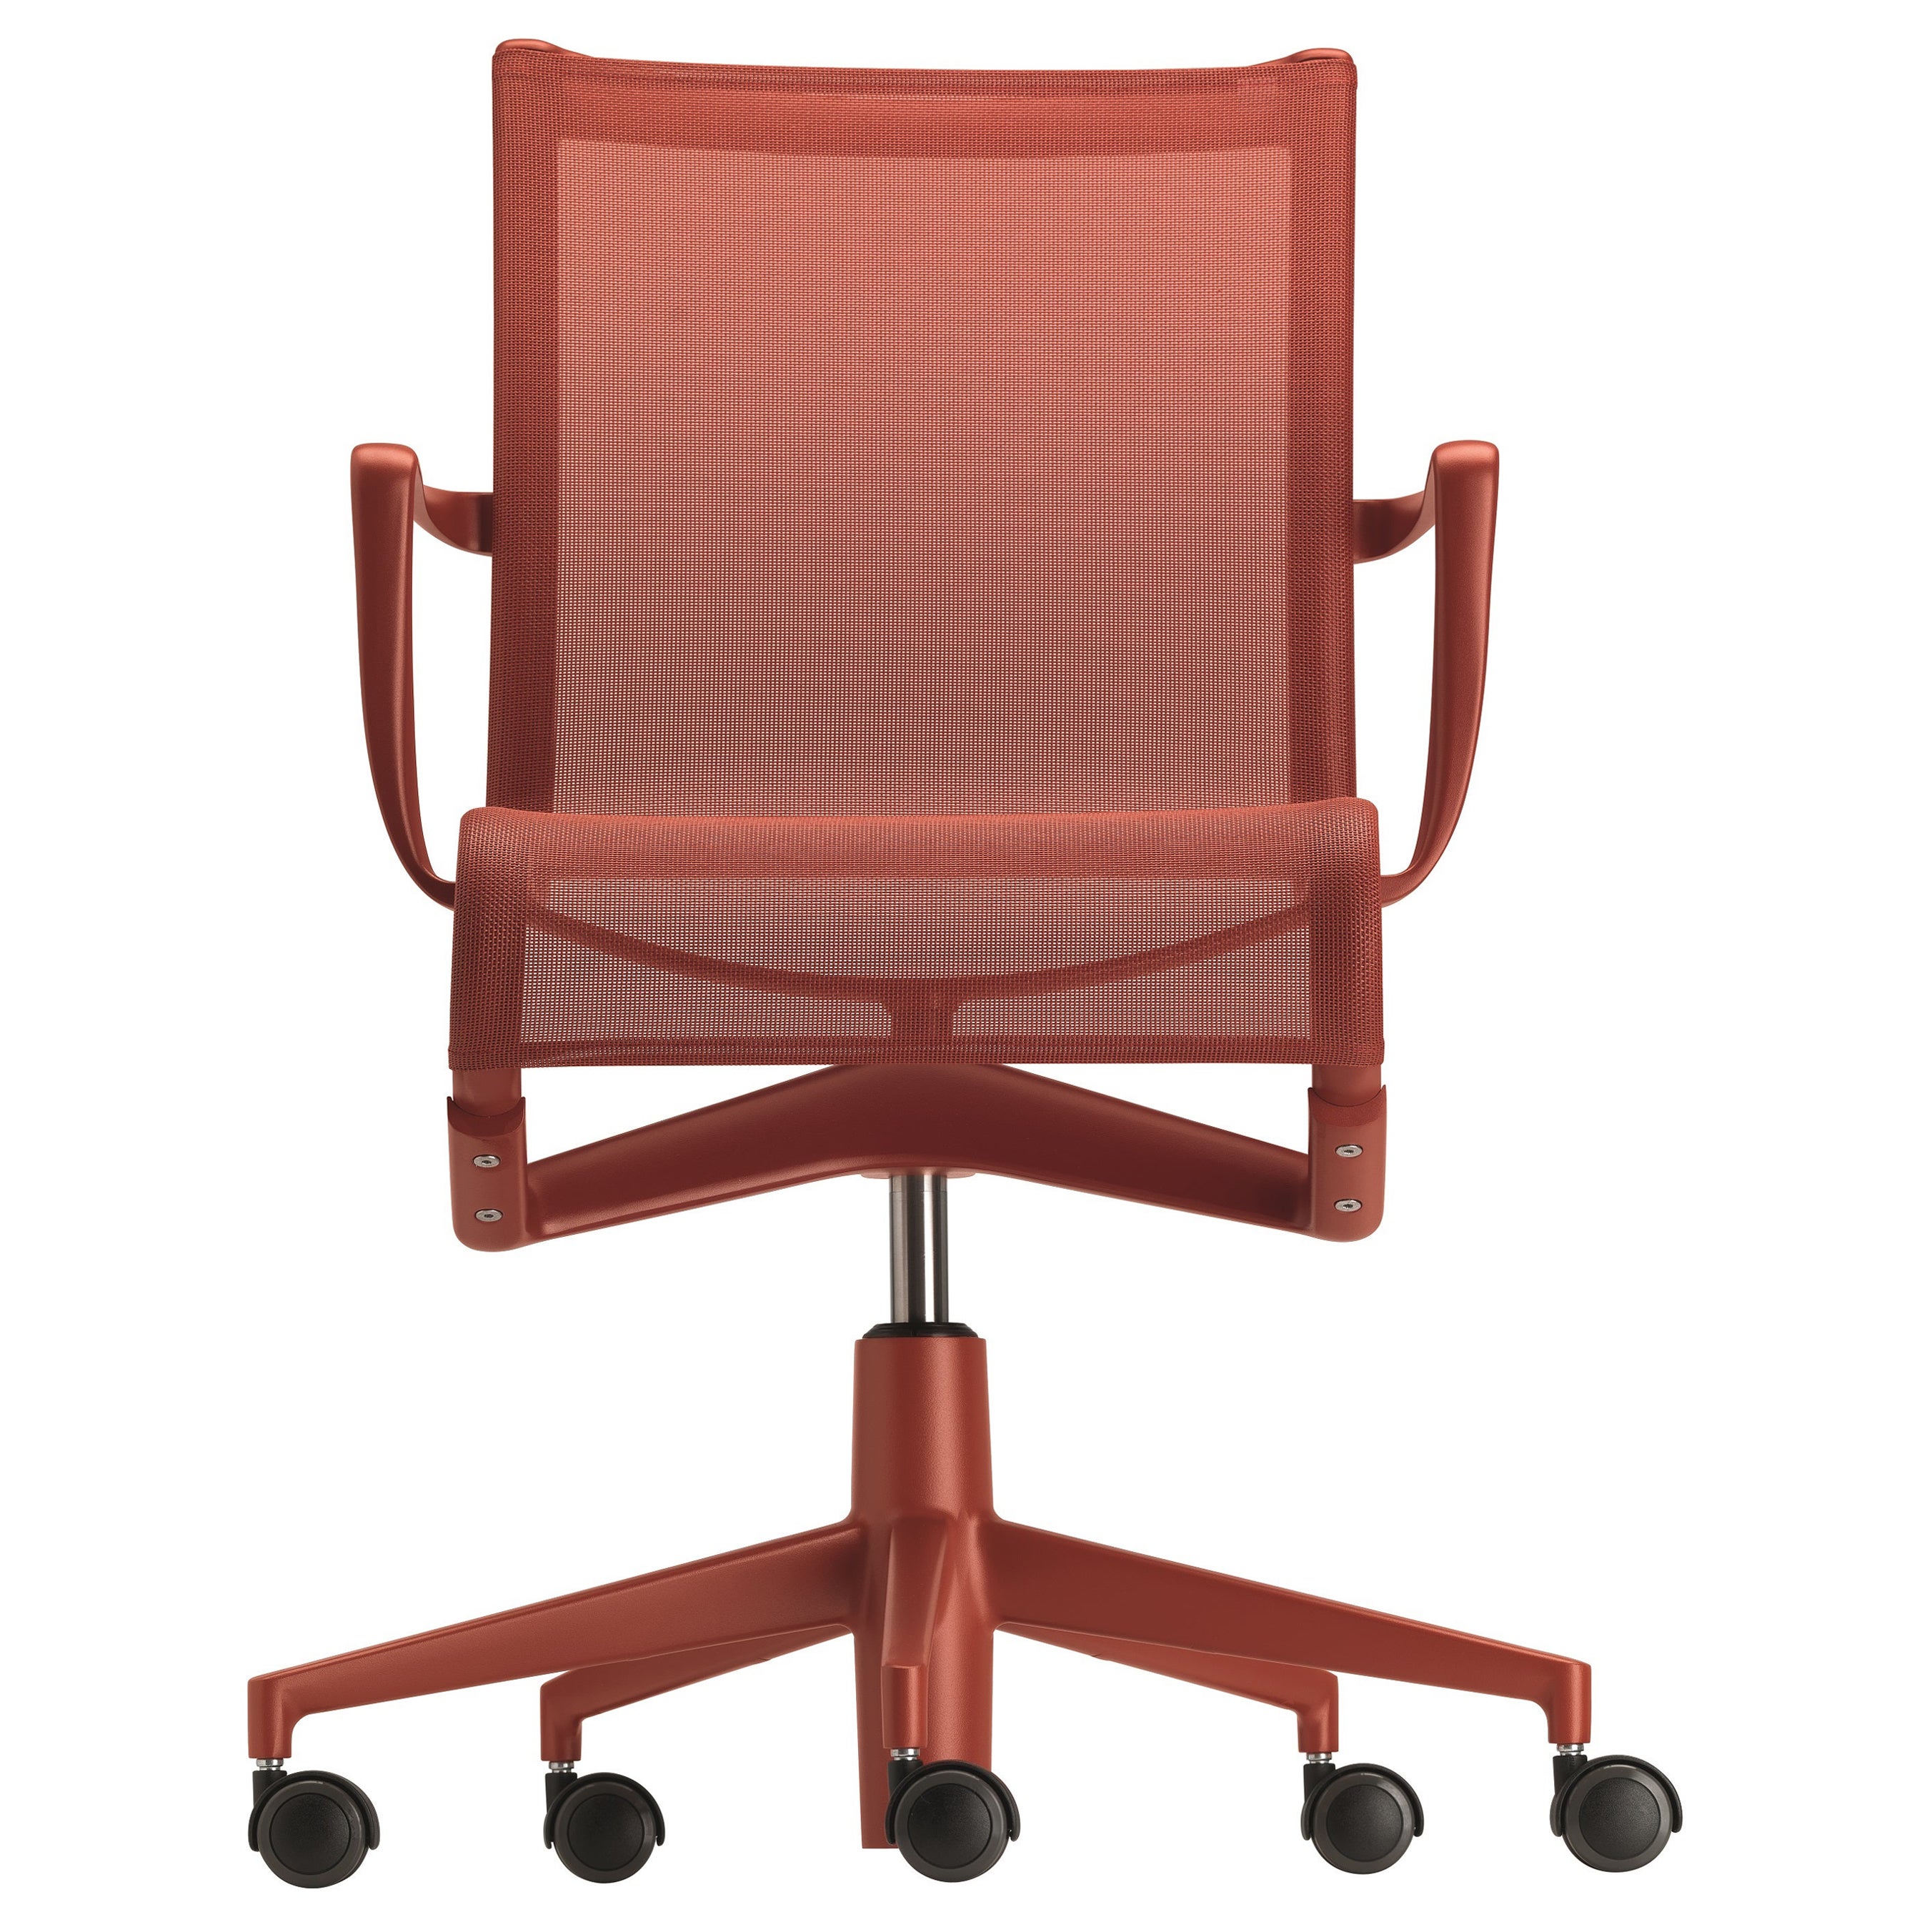 Alias 434 Rollingframe 44 Chair in Coral Red Mesh & Red Lacquered Aluminum Frame